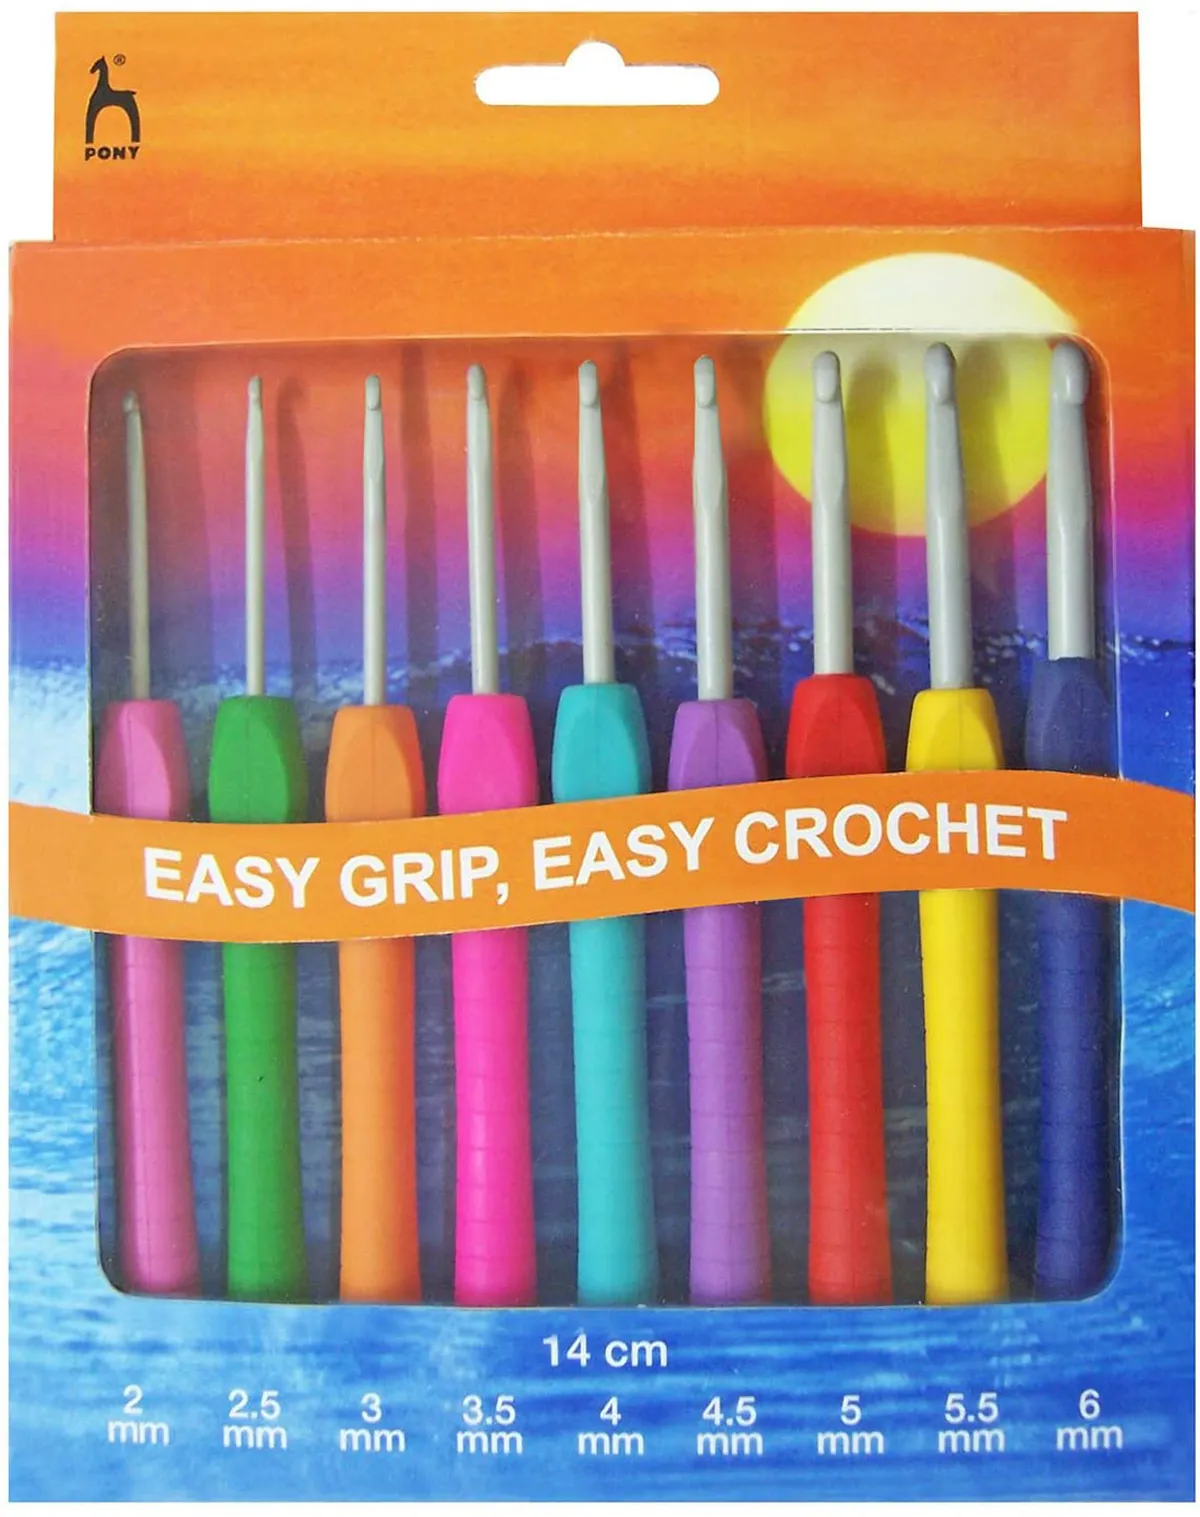 Best Crochet Hooks and Accessories of 2020